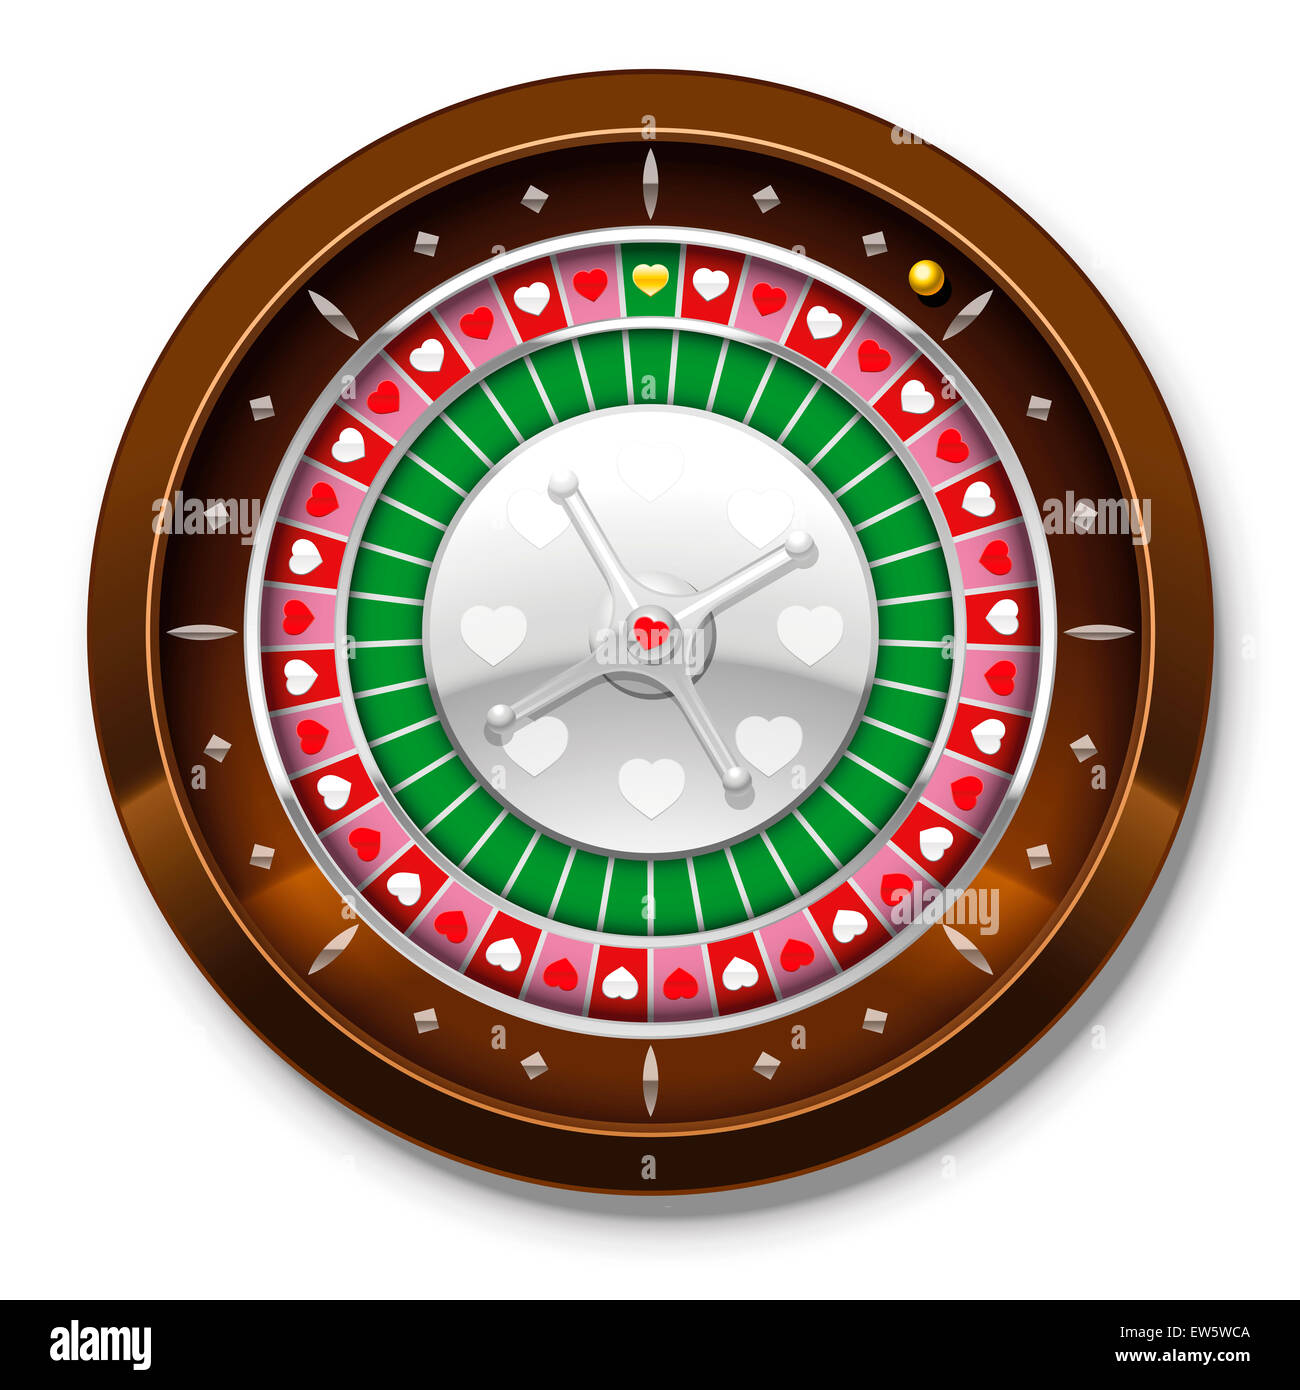 Roulette wheel with heart symbols instead of numbers. Stock Photo